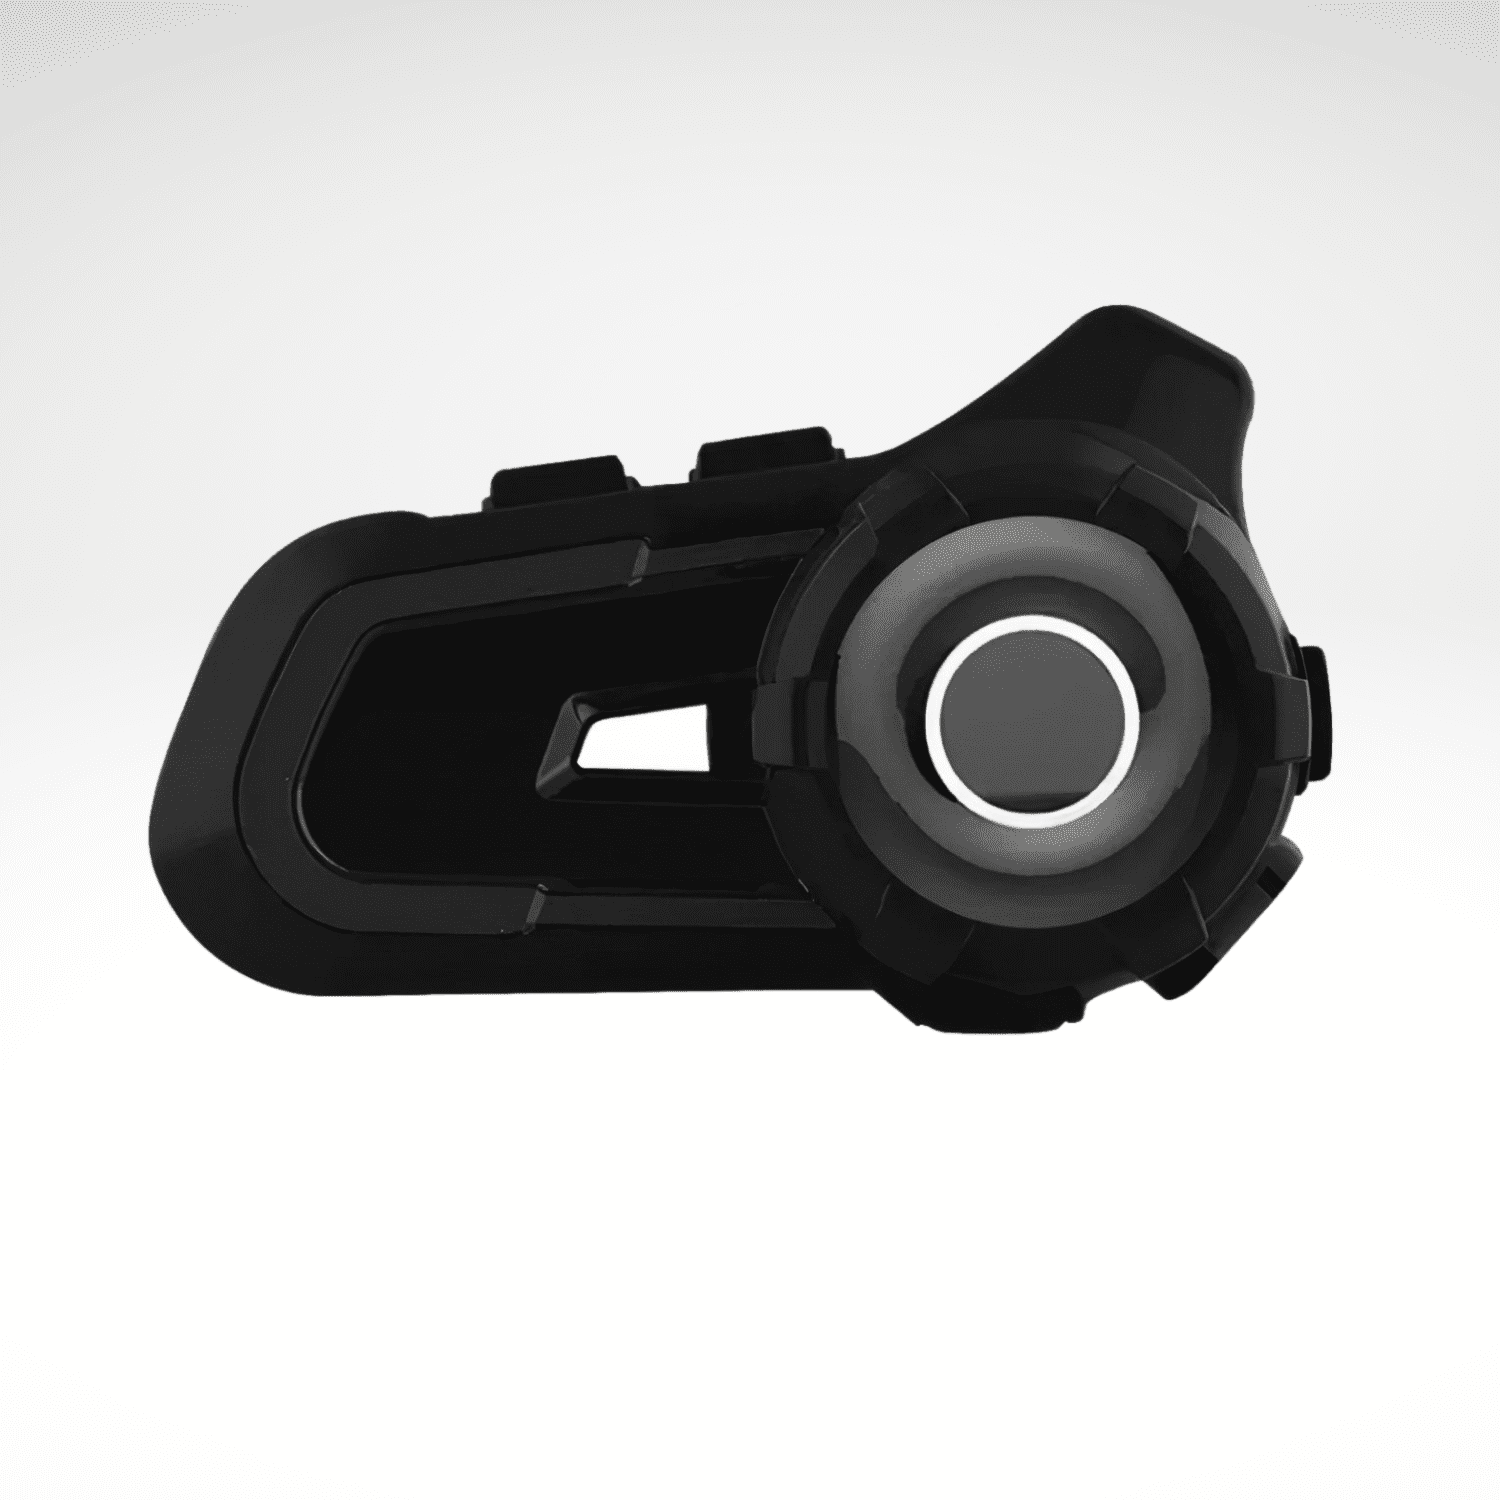 Motorcycle Bluetooth Headset